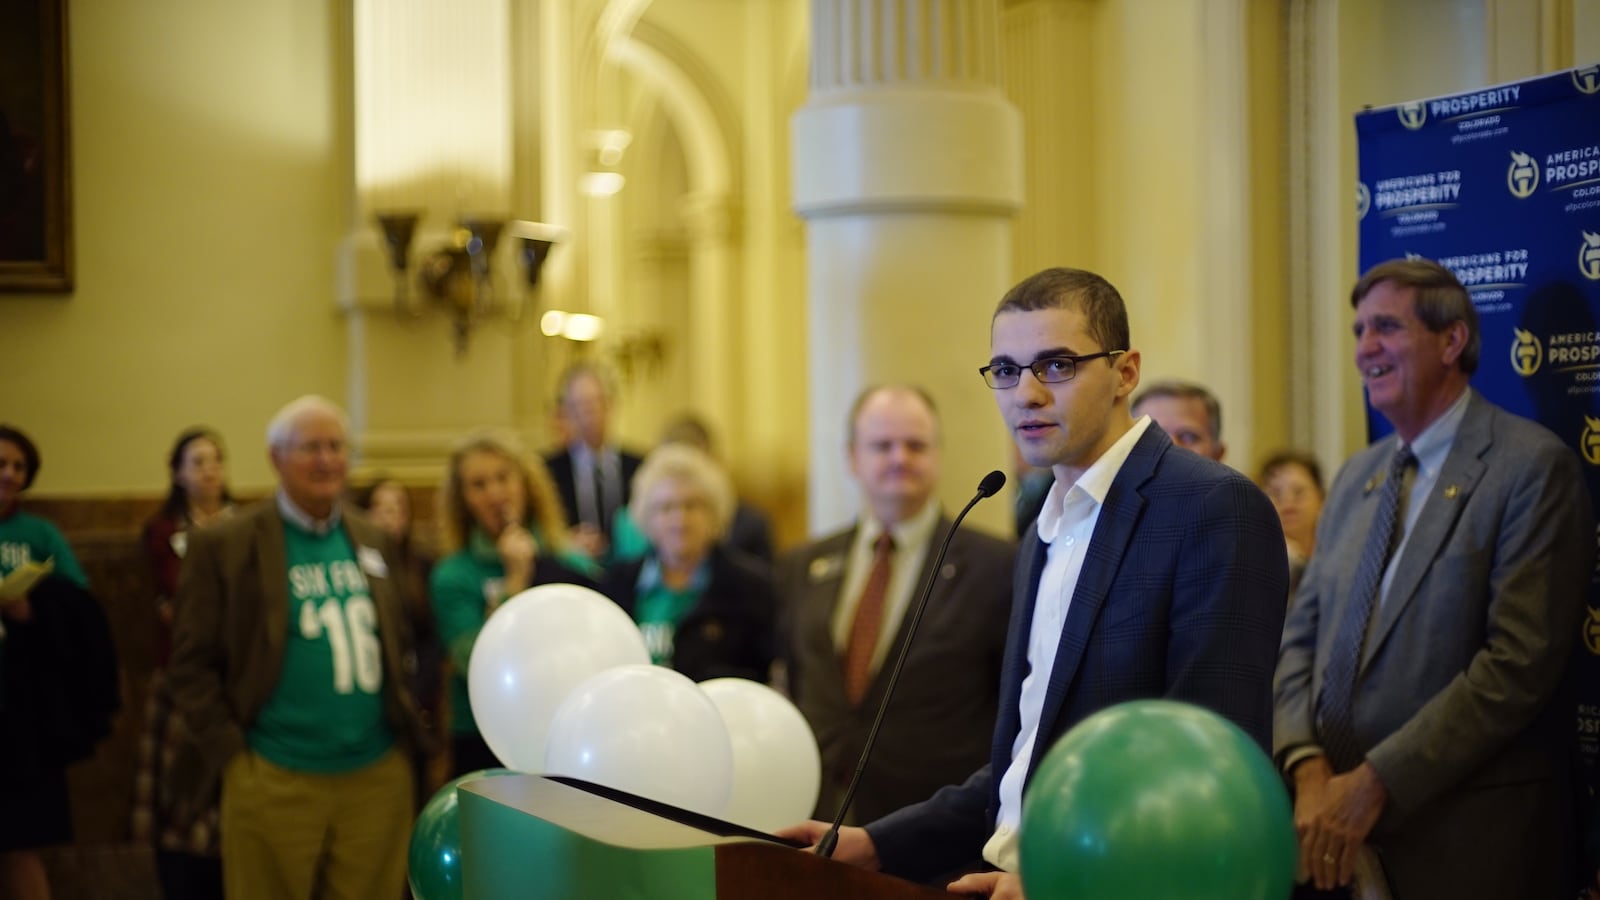 Michael Fields addresses a crowd at the Colorado Capitol. (Photo courtesy Americans For Prosperity)